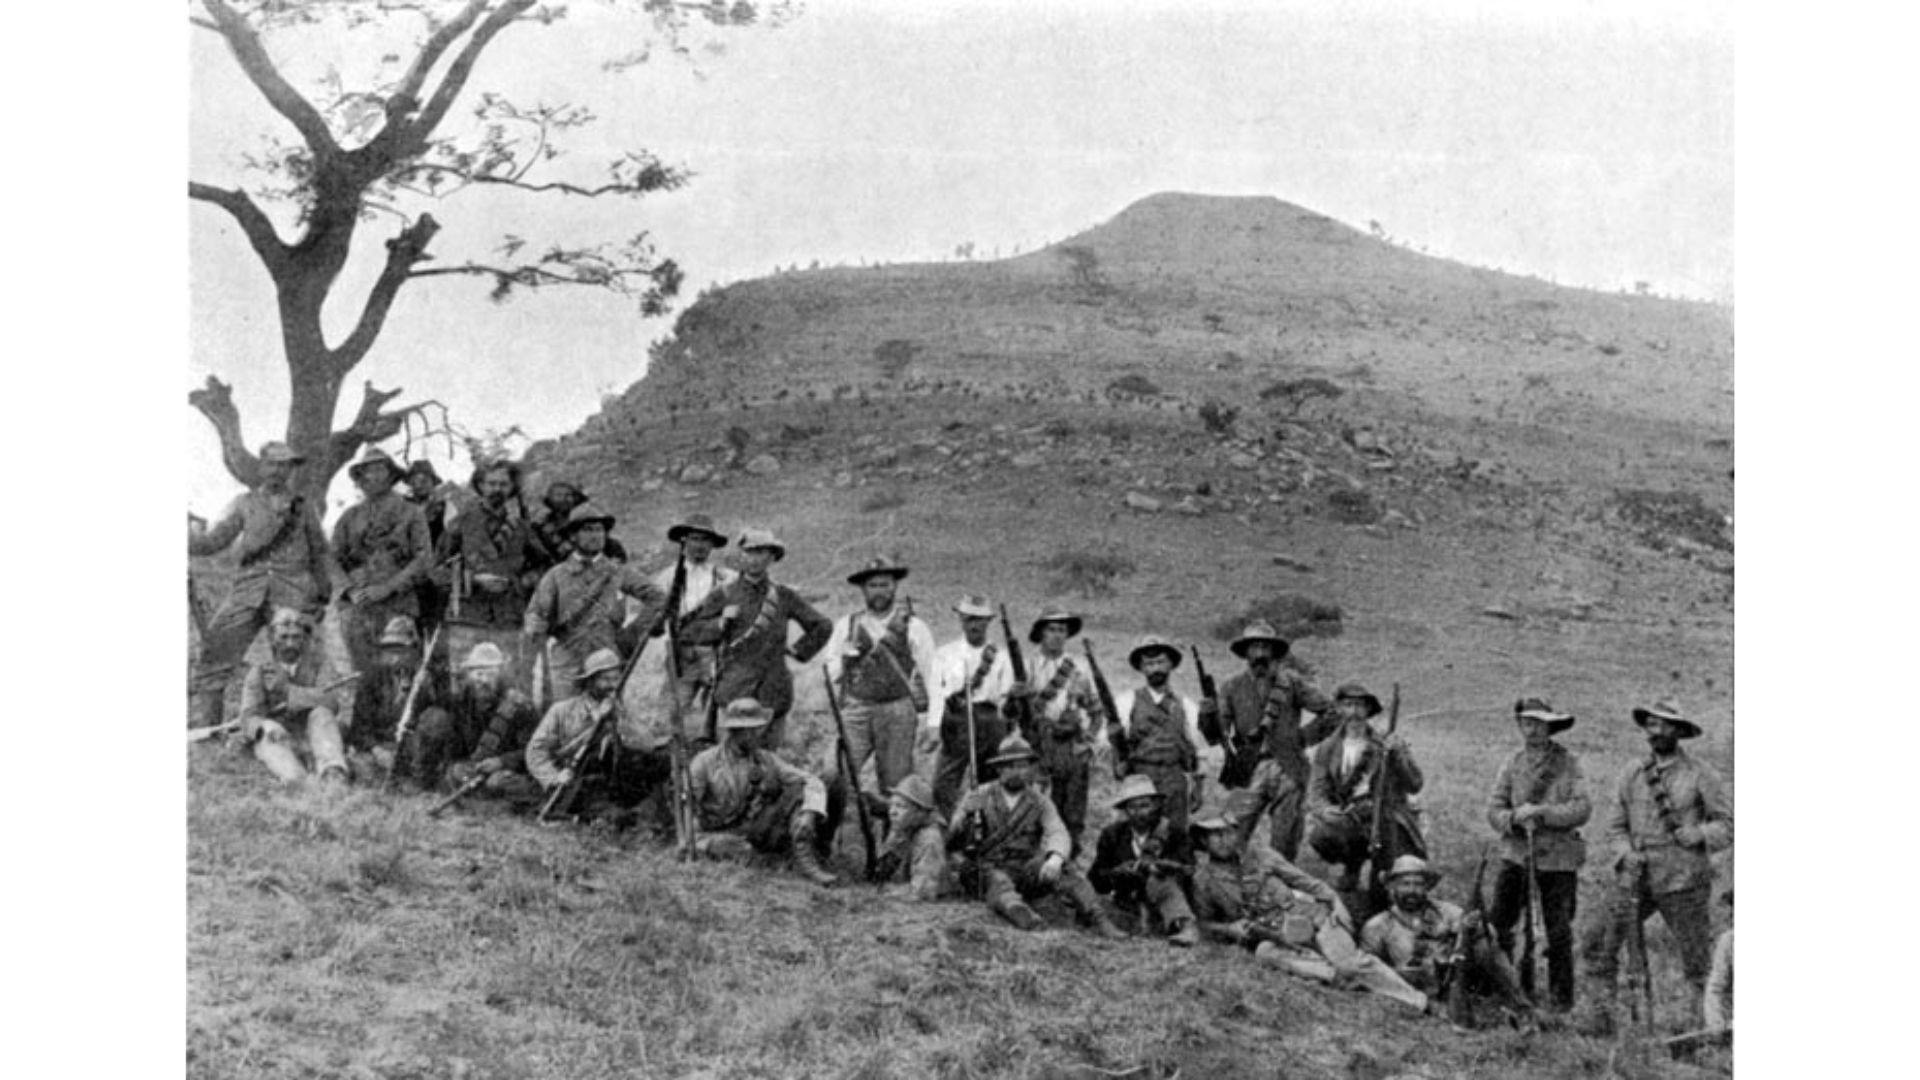 Boers in front of the Spion Kop hill, after their victory.